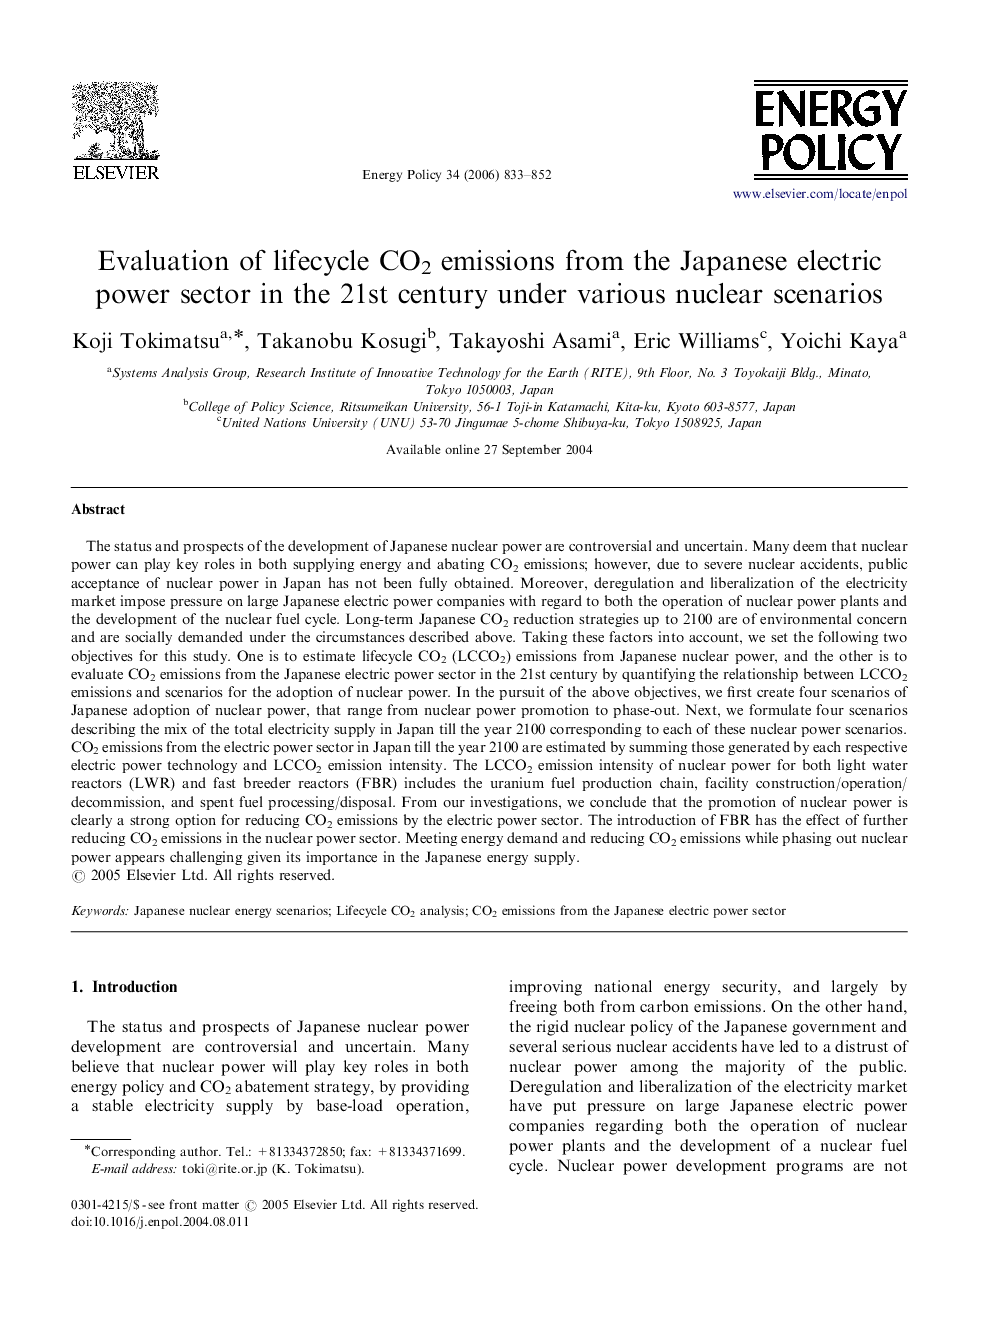 Evaluation of lifecycle CO2 emissions from the Japanese electric power sector in the 21st century under various nuclear scenarios